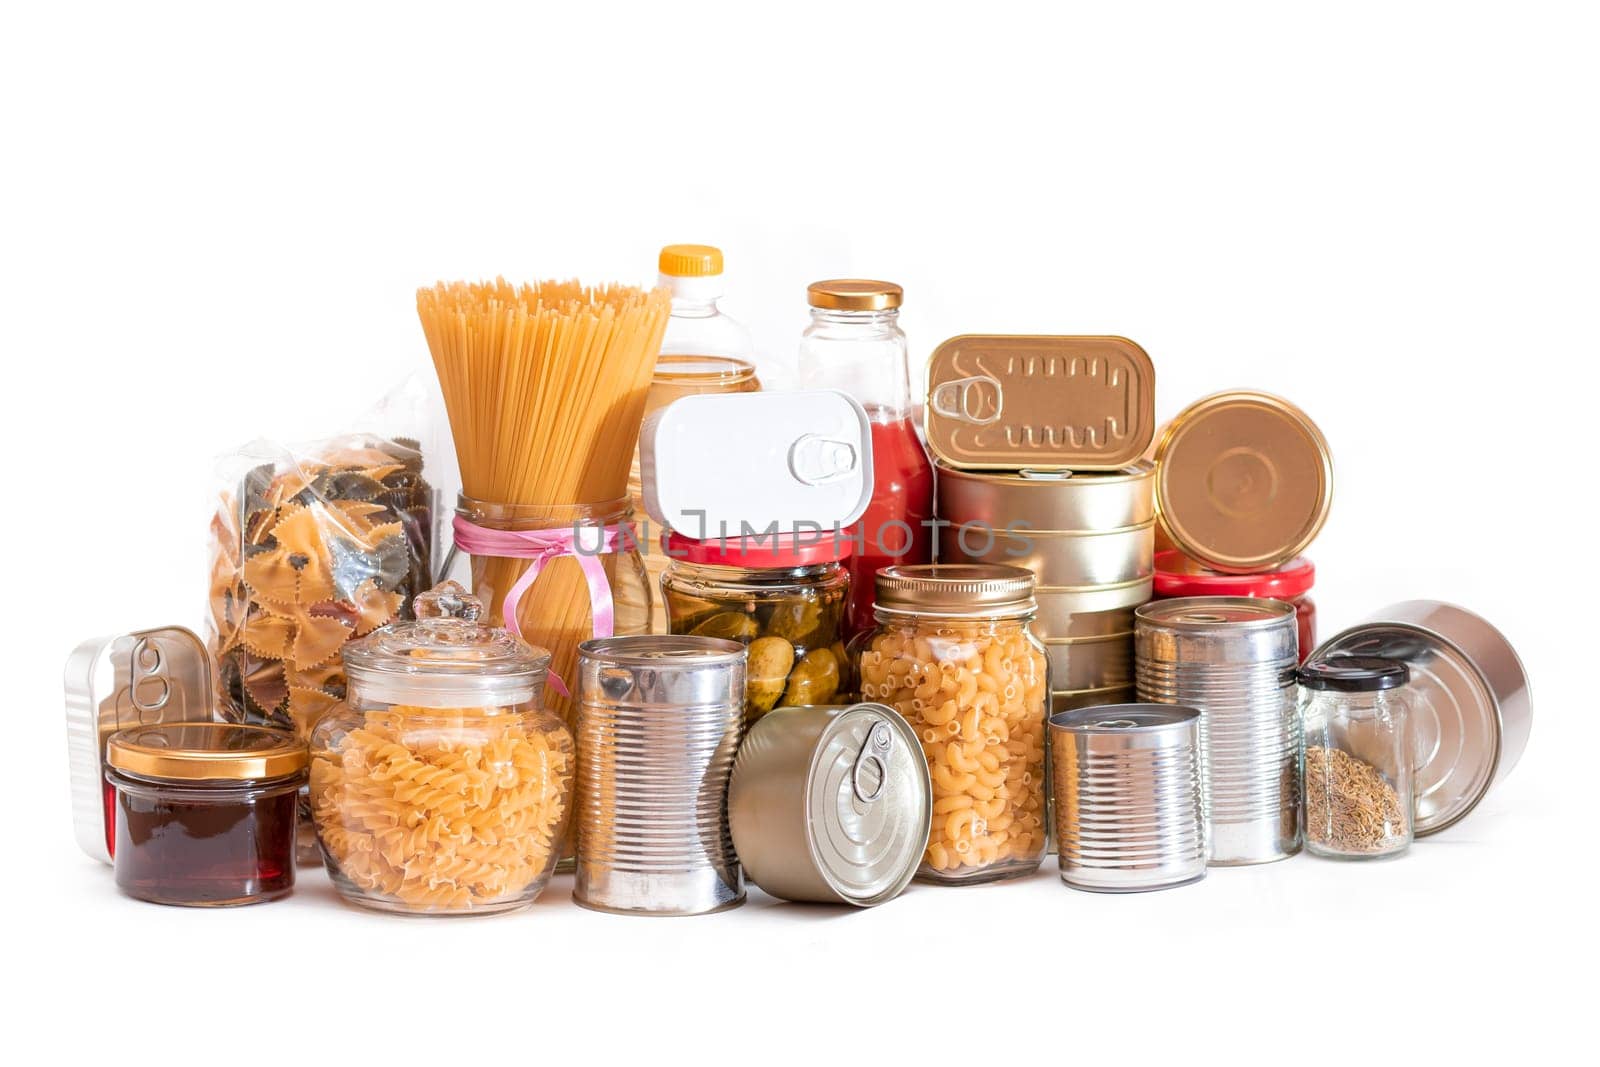 Food Reserves: Canned Food, Spaghetti, Pate, Tuna, Tomato Juice, Pasta, Fish and Grocery - Isolated on White Background. Emergency Food Storage in Case of Crisis. Strategic Food Supplies - Isolation